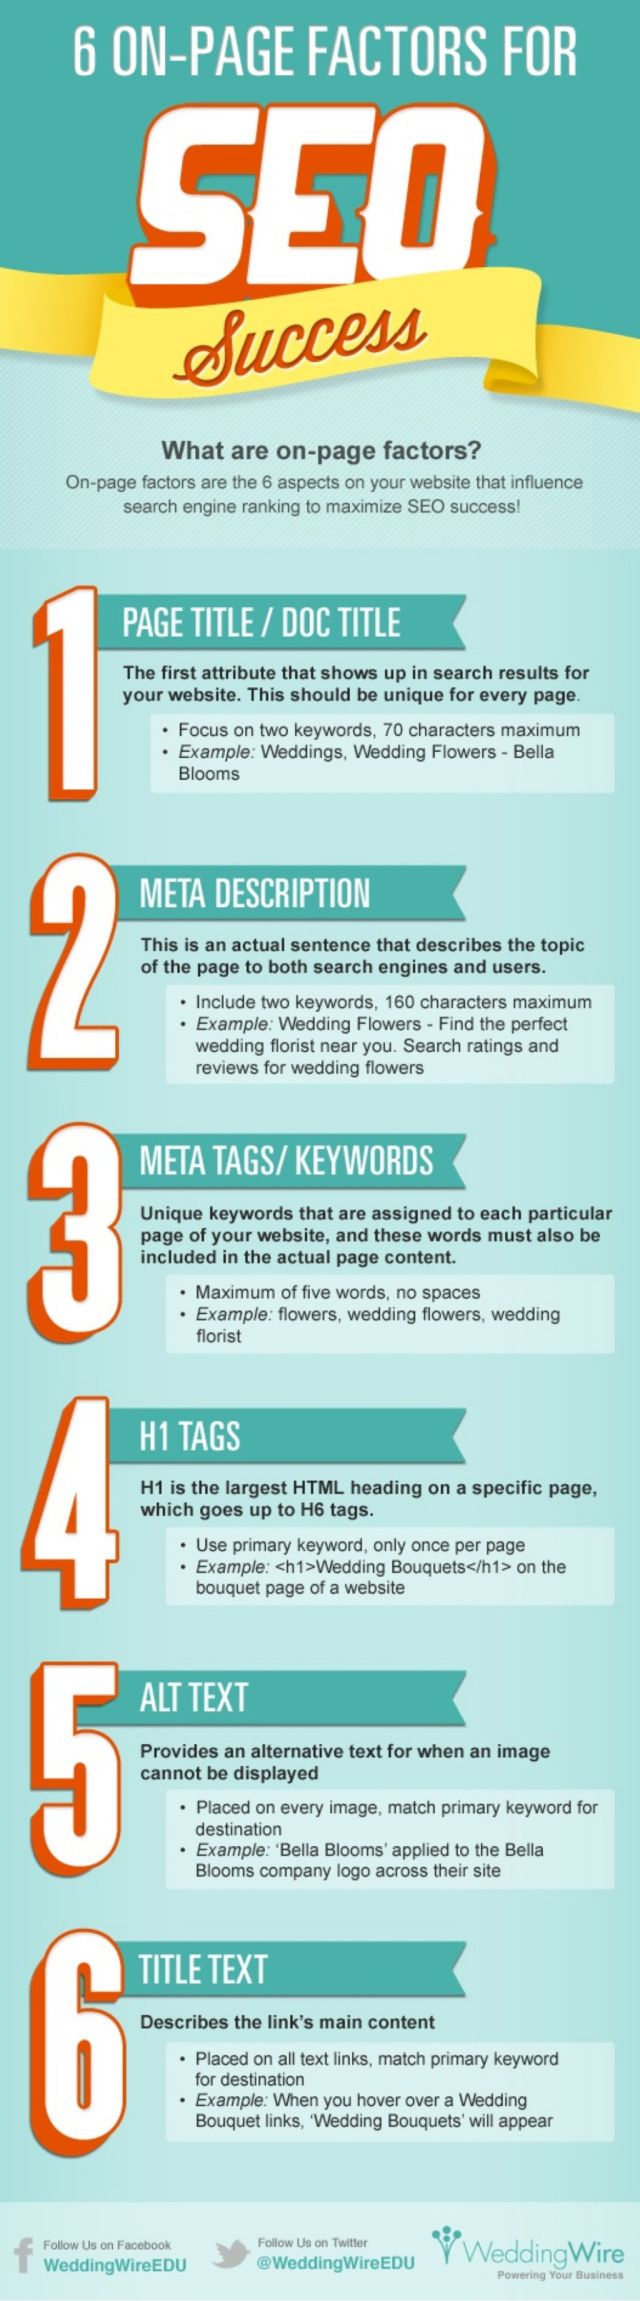 Advertising-Infographics-A-1-Websolution-Best-Internet-Marketing-Company-with-Proven-Results-in-Search Advertising Infographics : A-1 Websolution - Best Internet Marketing Company with Proven Results in Search ...